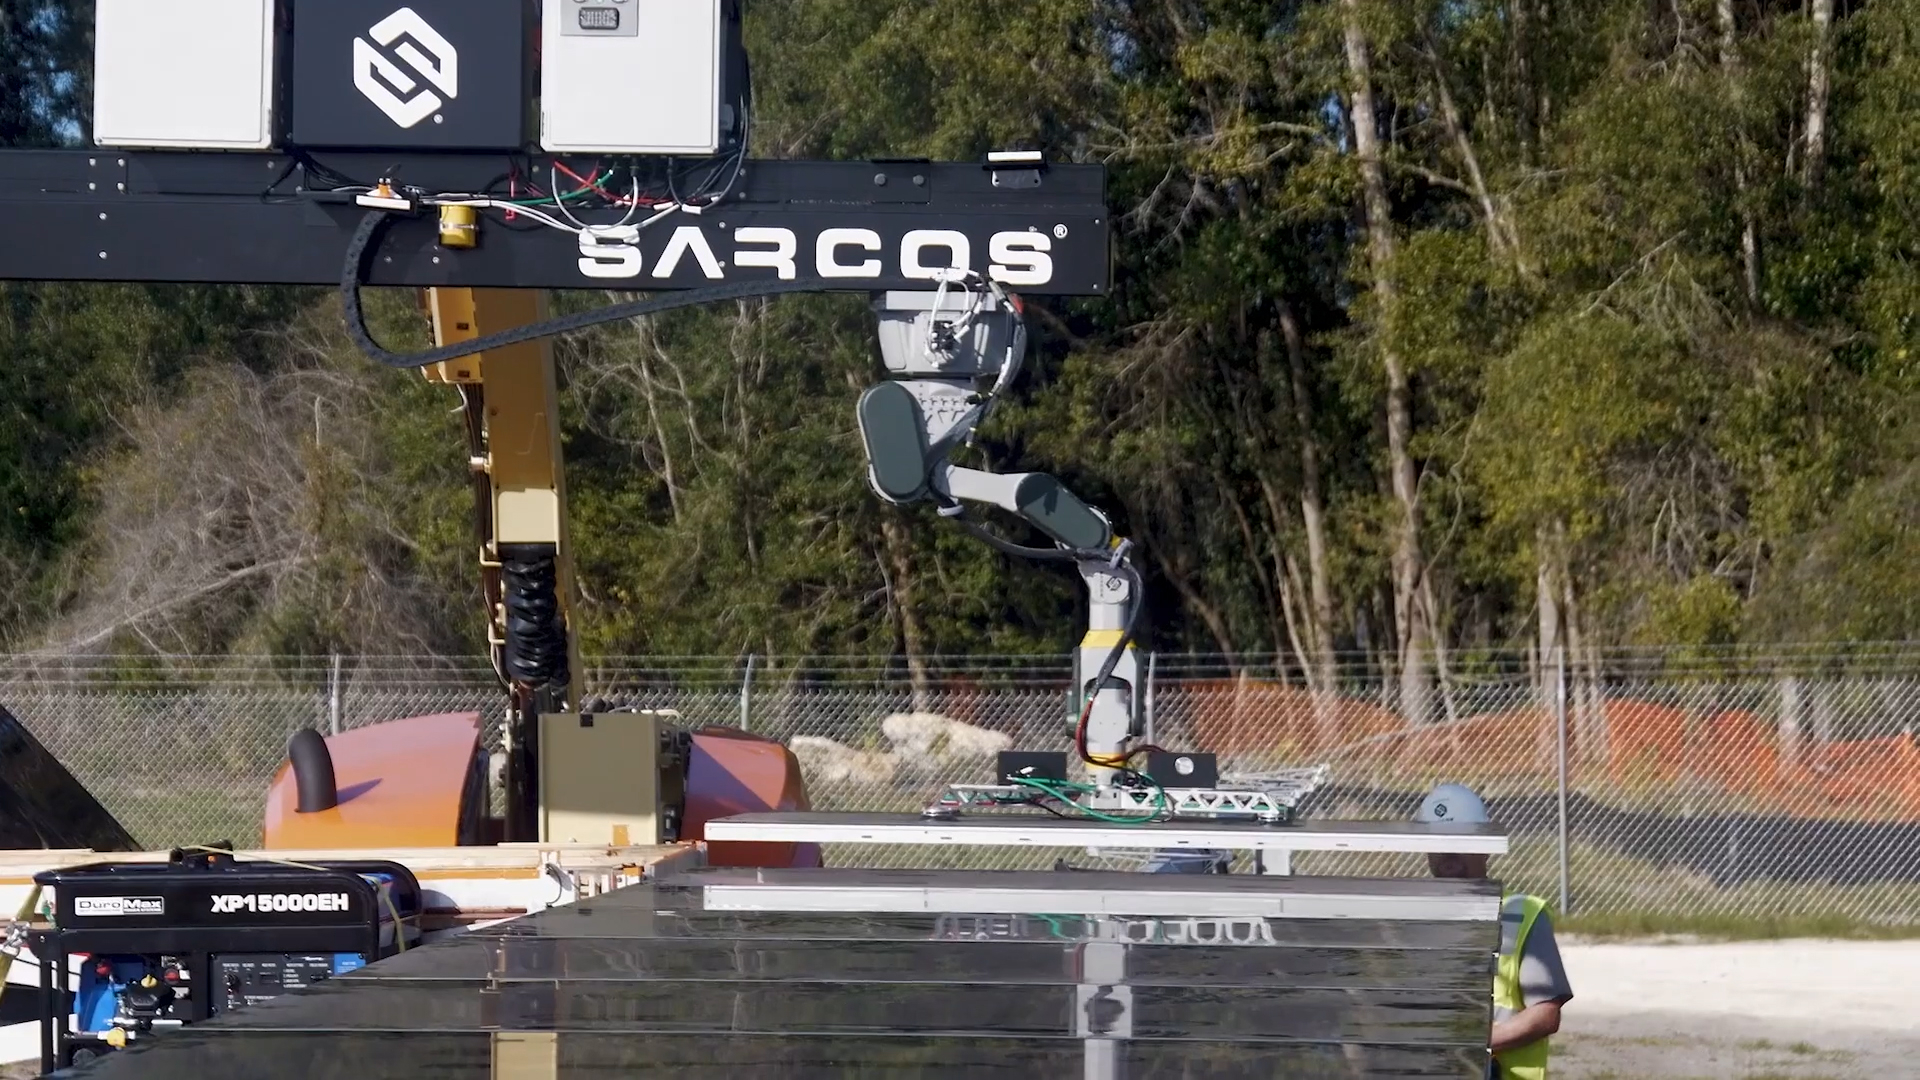 Sarcos Achieves Final Validation of Outdoor Autonomous Manipulation of Photovoltaic Panels Project for U.S. Department of Energy